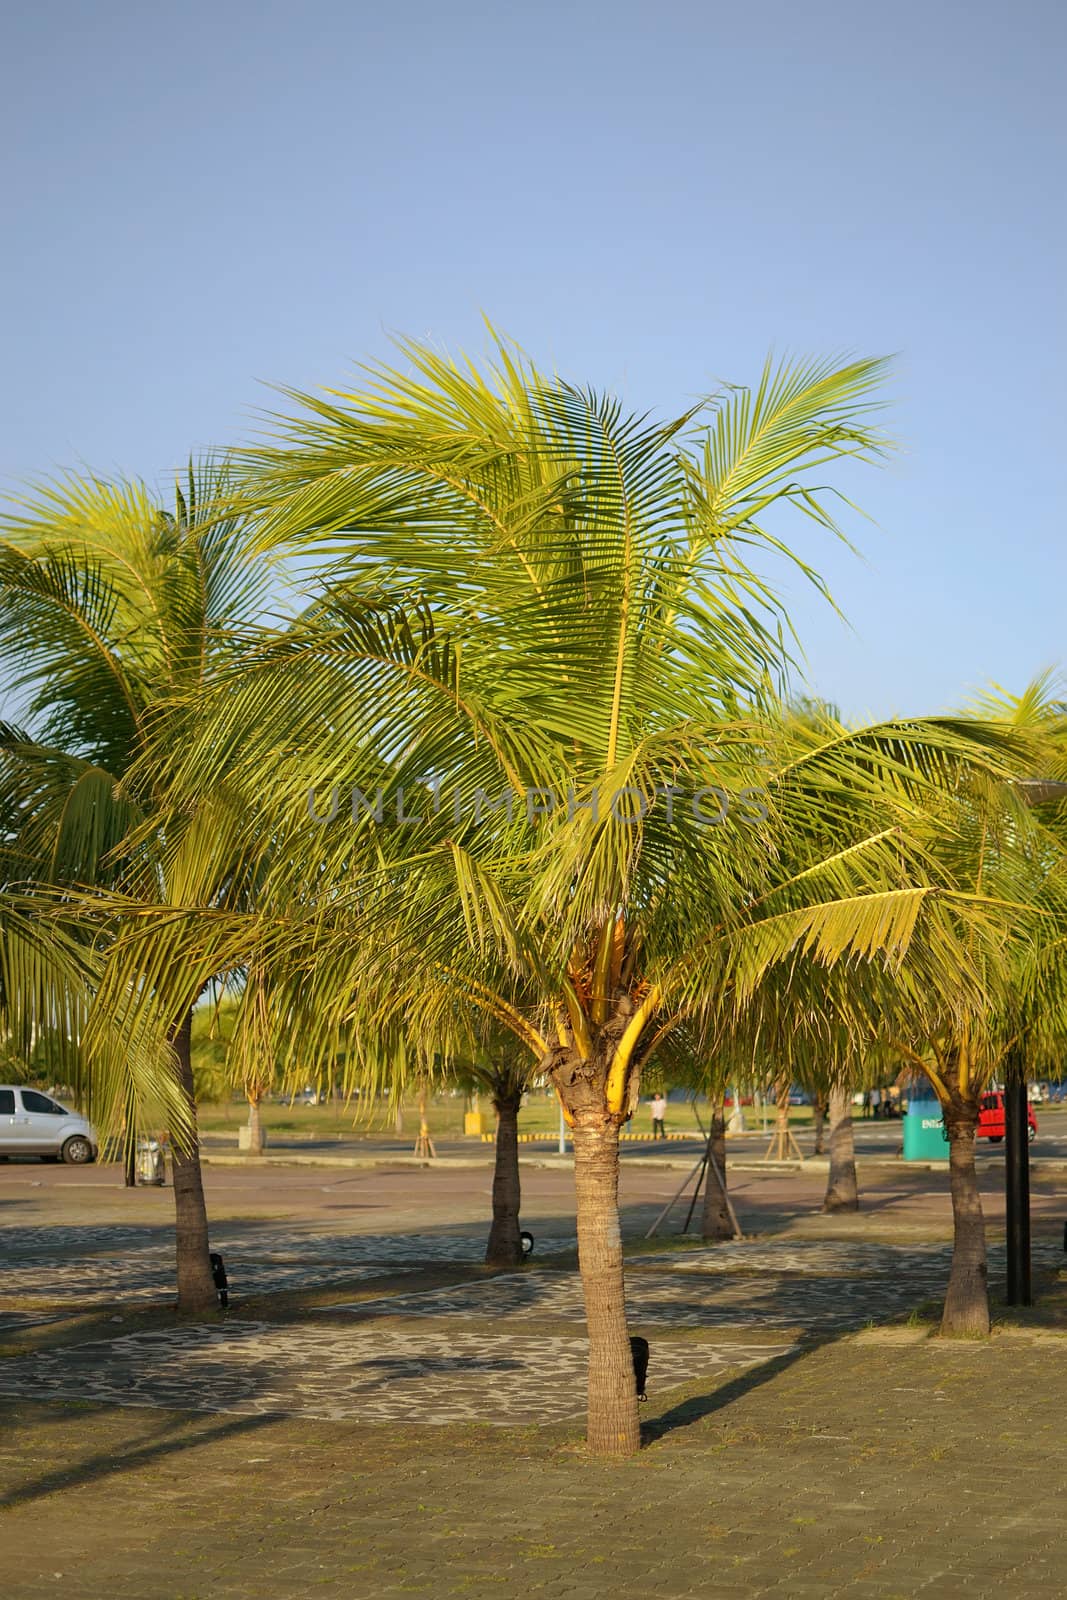 small coconut trees against blue sky background.